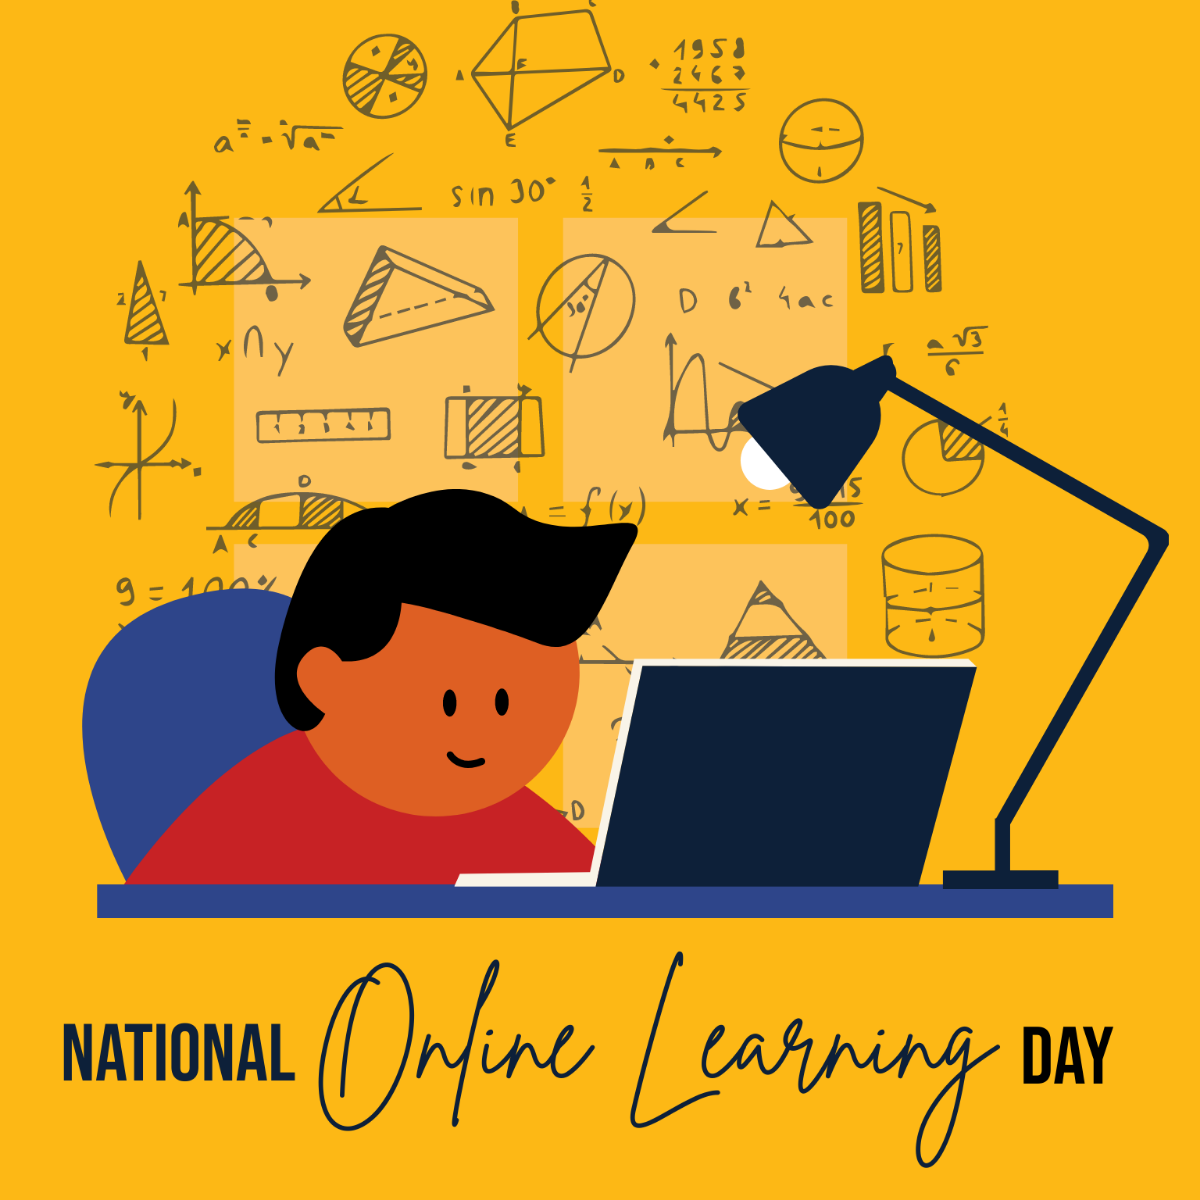 Free National Online Learning Day Cartoon Vector Template